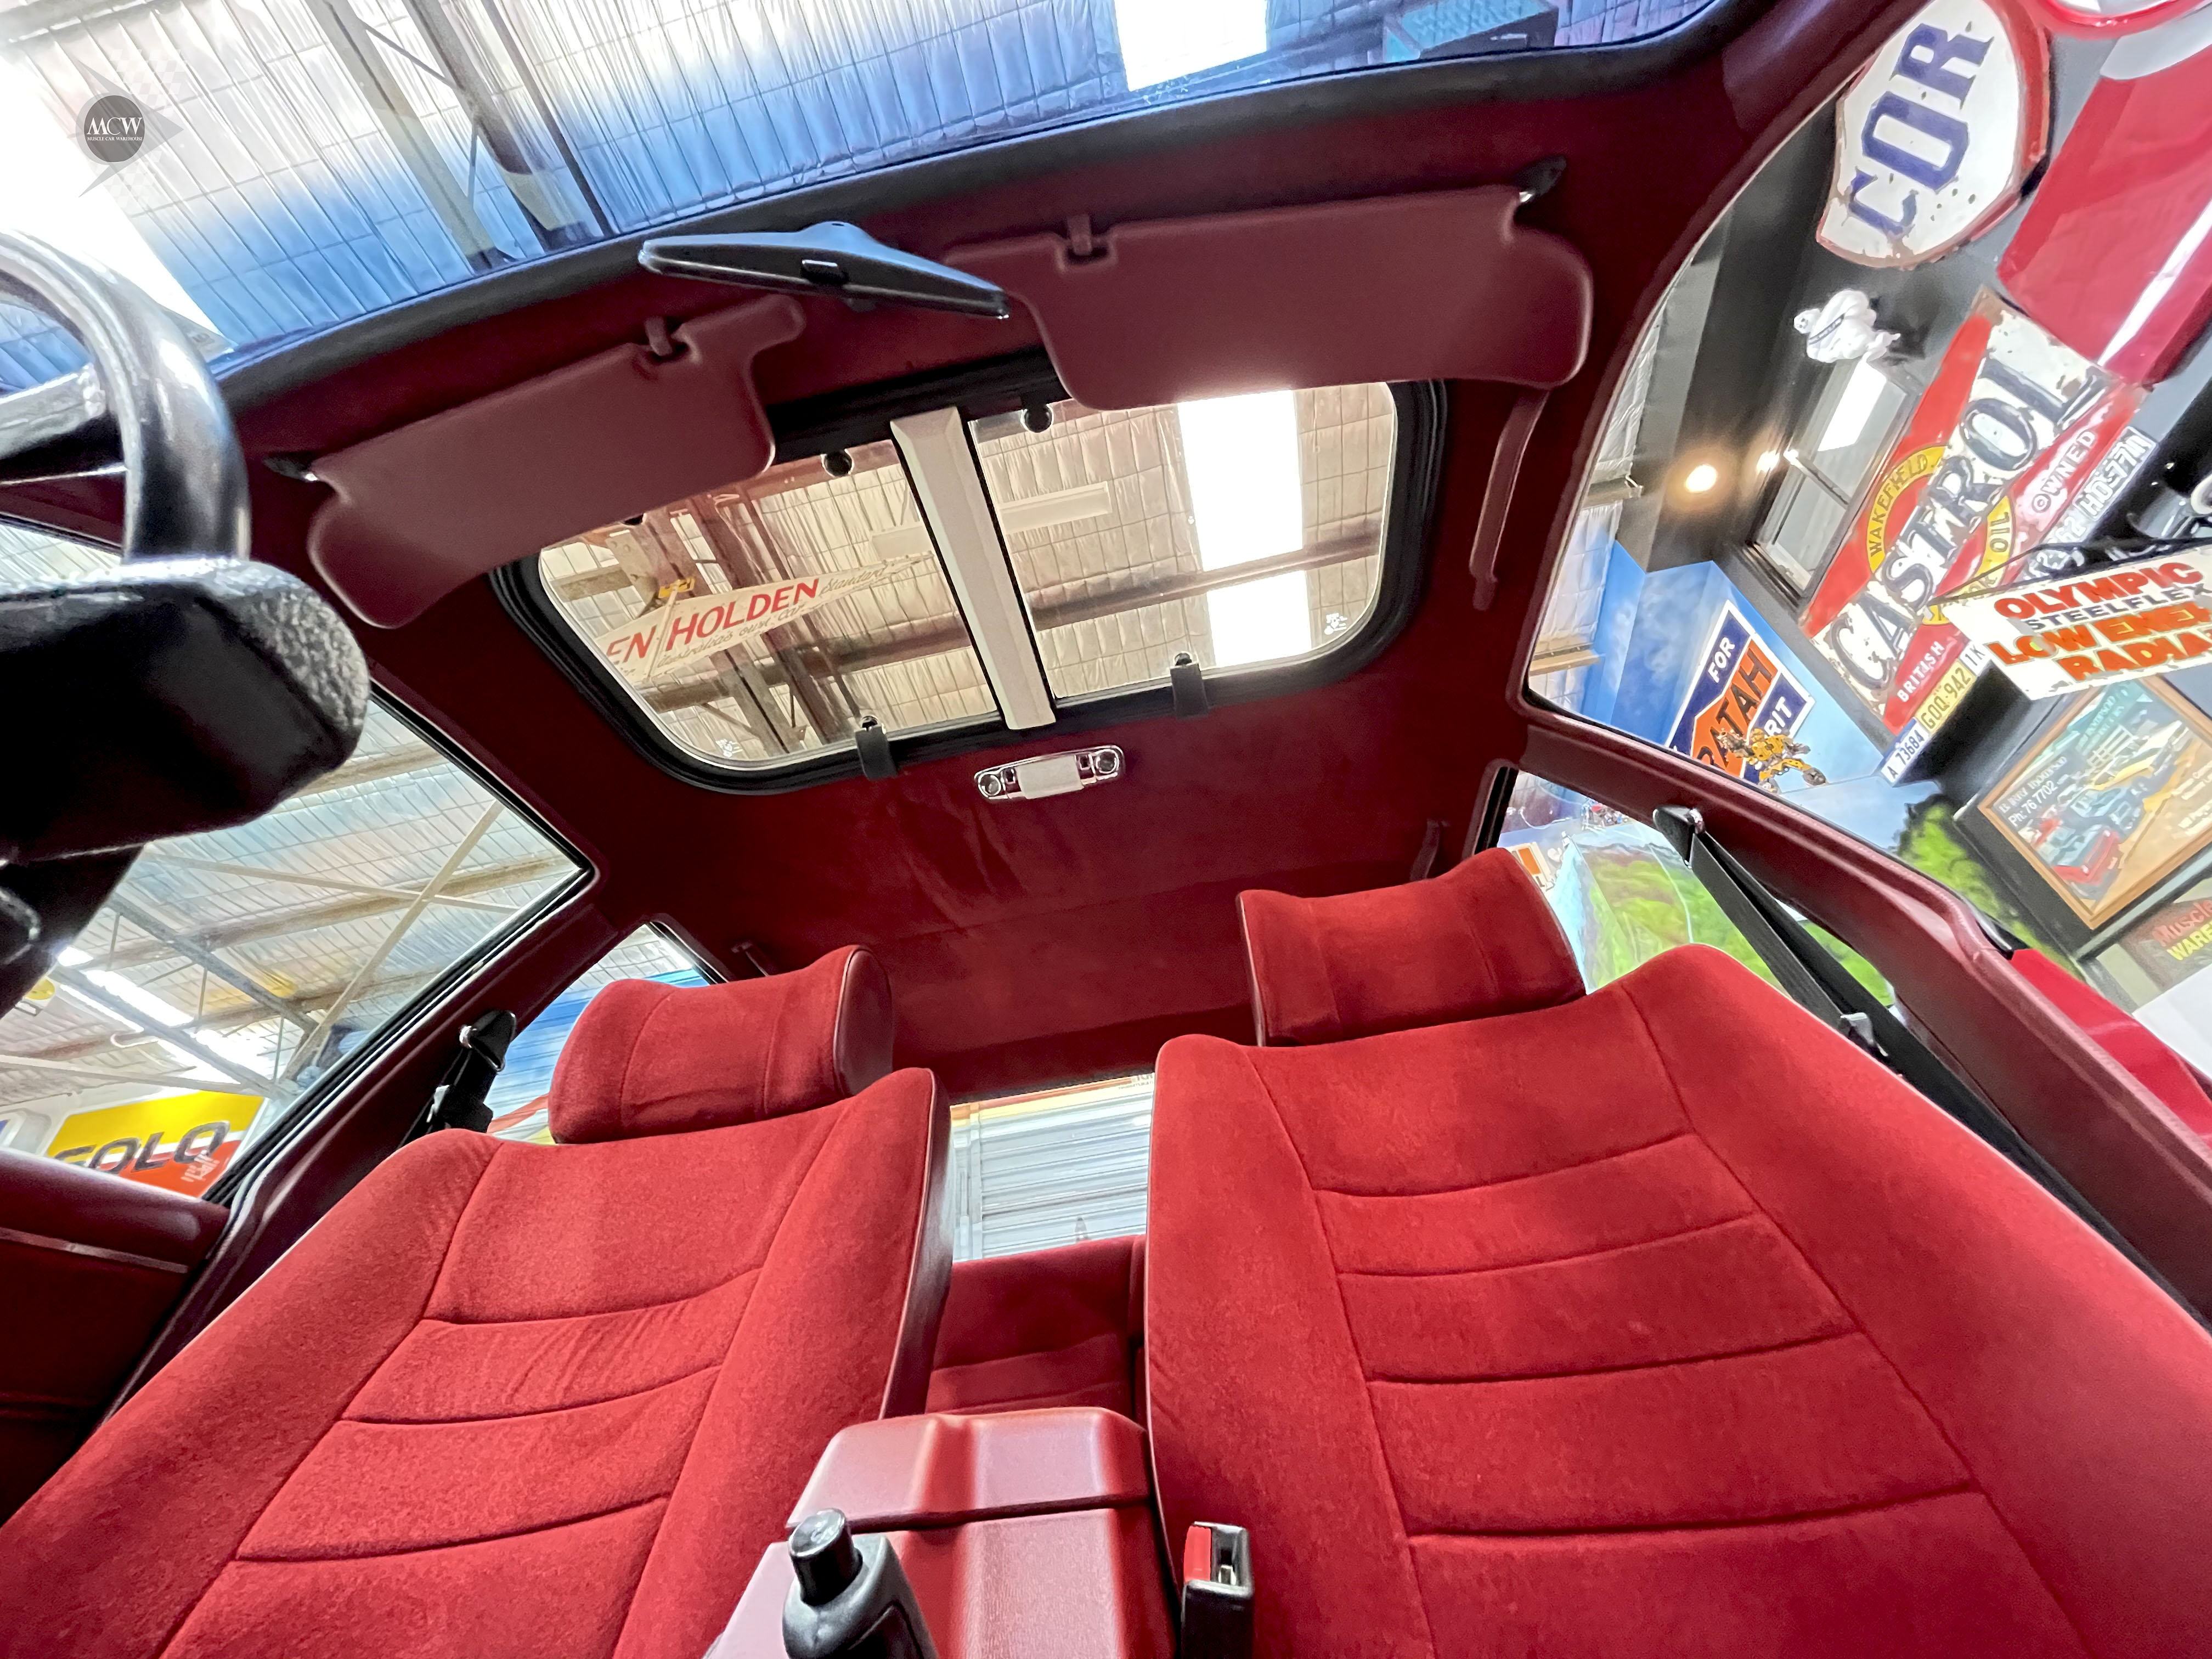 HDT VC Brock Commodore Interior - Muscle Car Warehouse